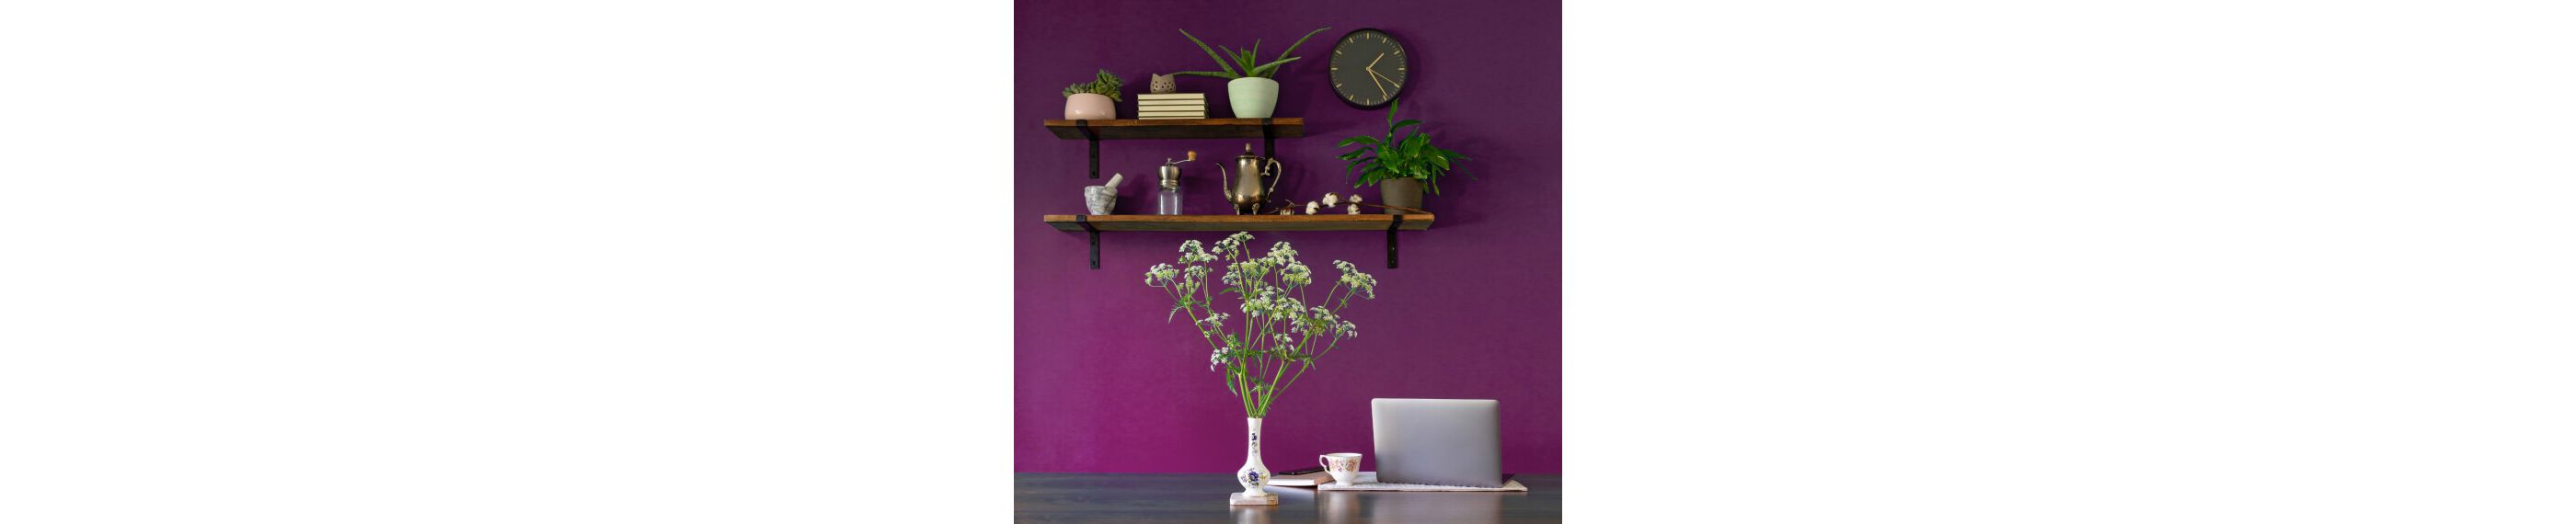 KitchenAid's Fresh Color of the Year Is the Perfect Pop of Purple